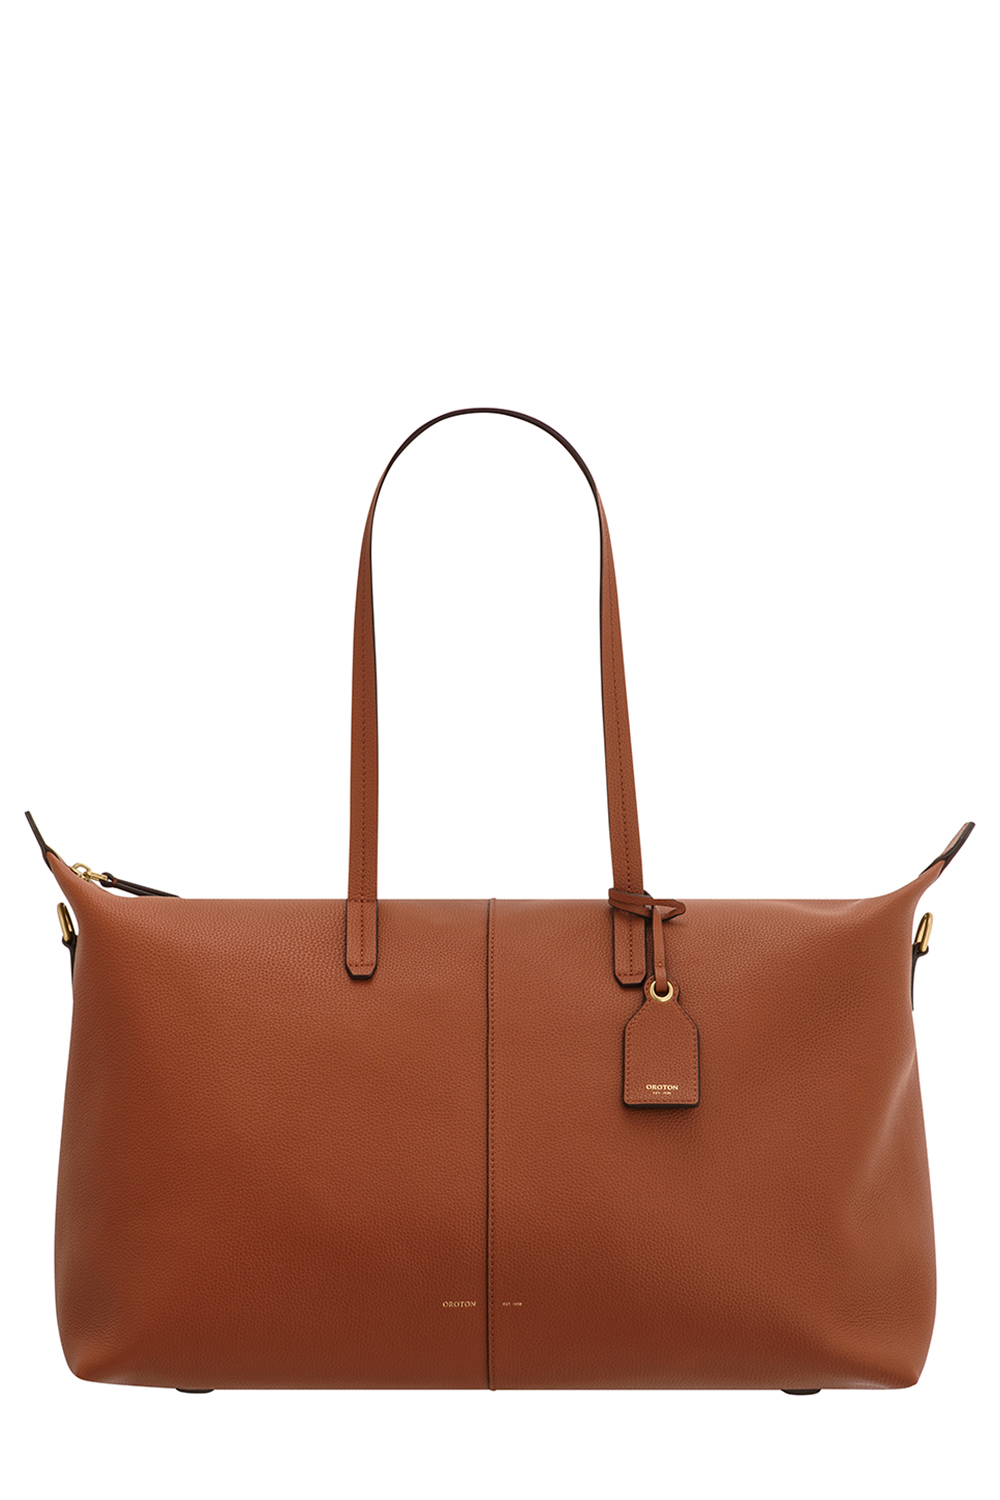 Discount Designer Handbags Outlet | Sale Up To 70% Off At THE OUTNET